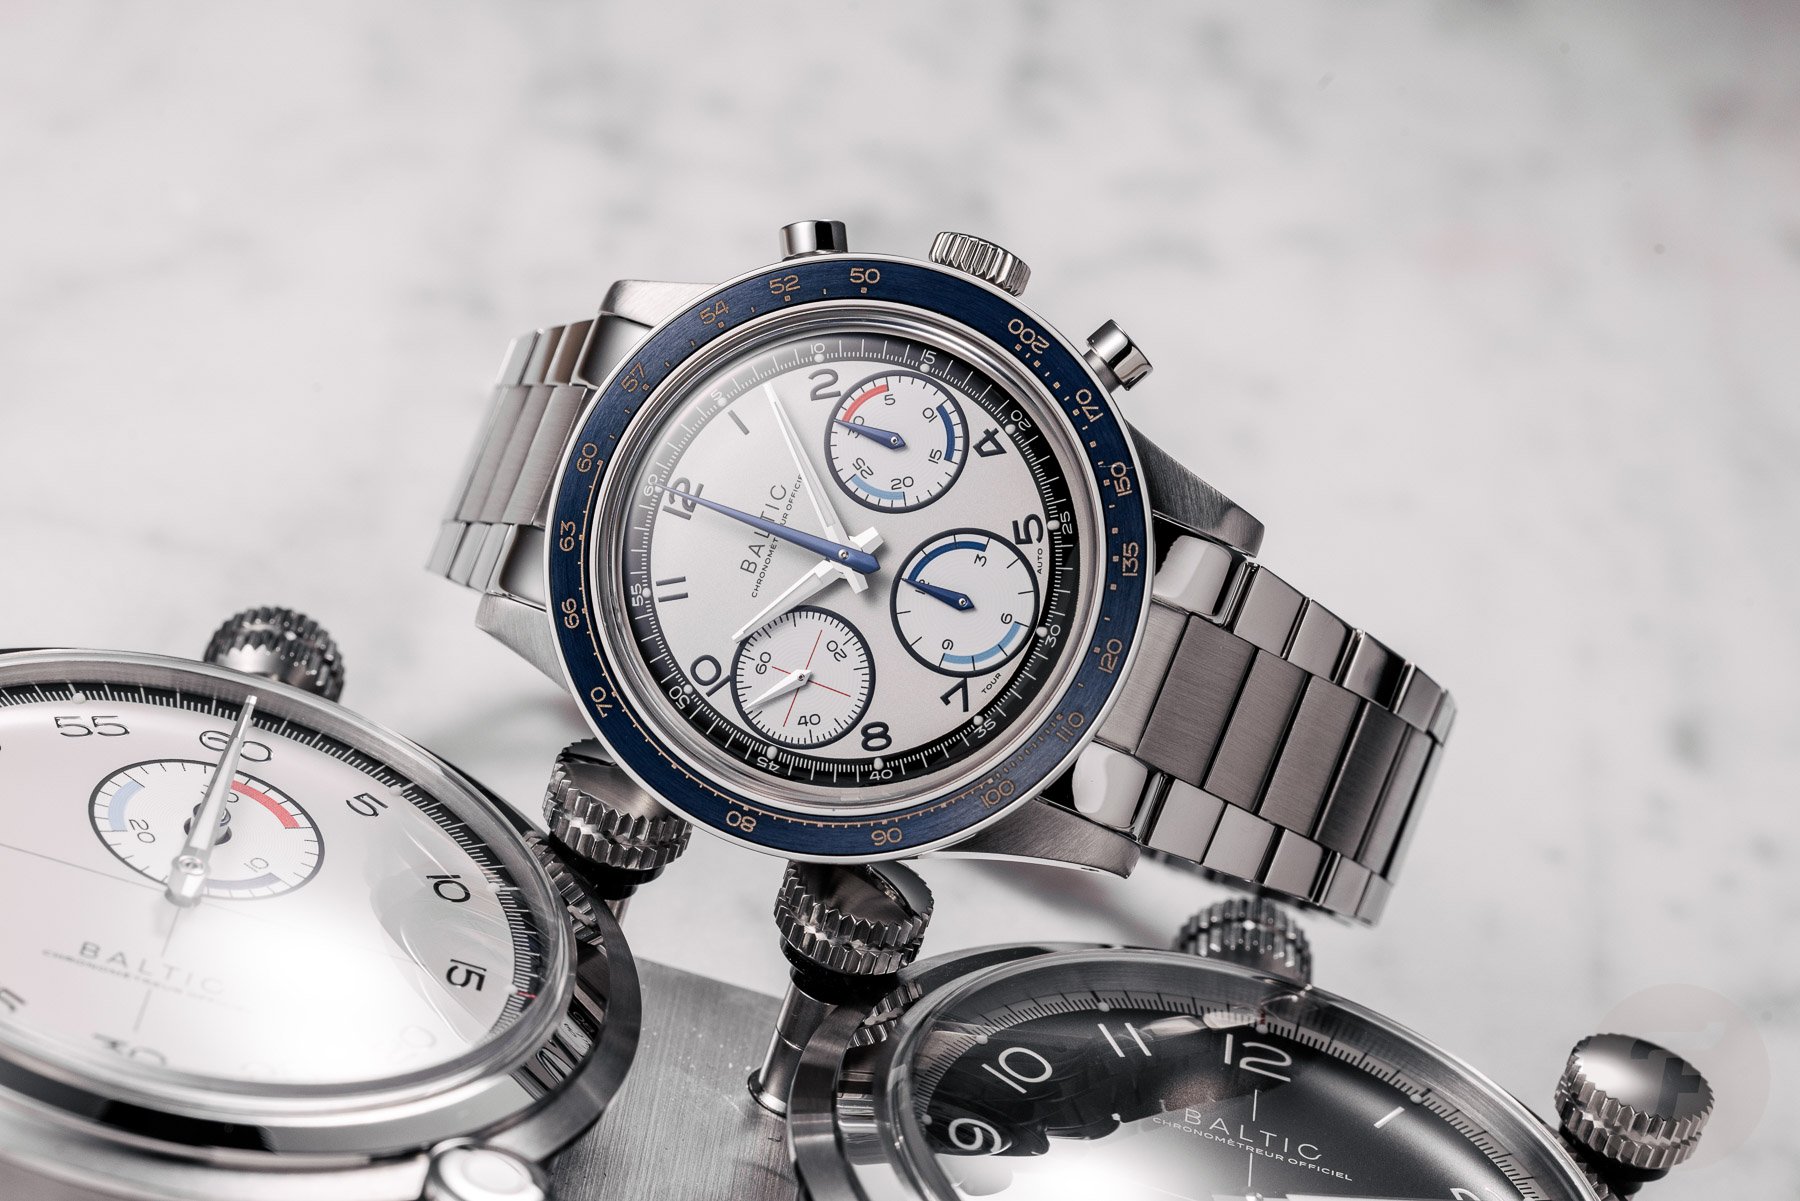 Introducing: The Baltic × Tour Auto 2024 Tricompax ? This Chronograph Is Ready For The Classic Road Rally